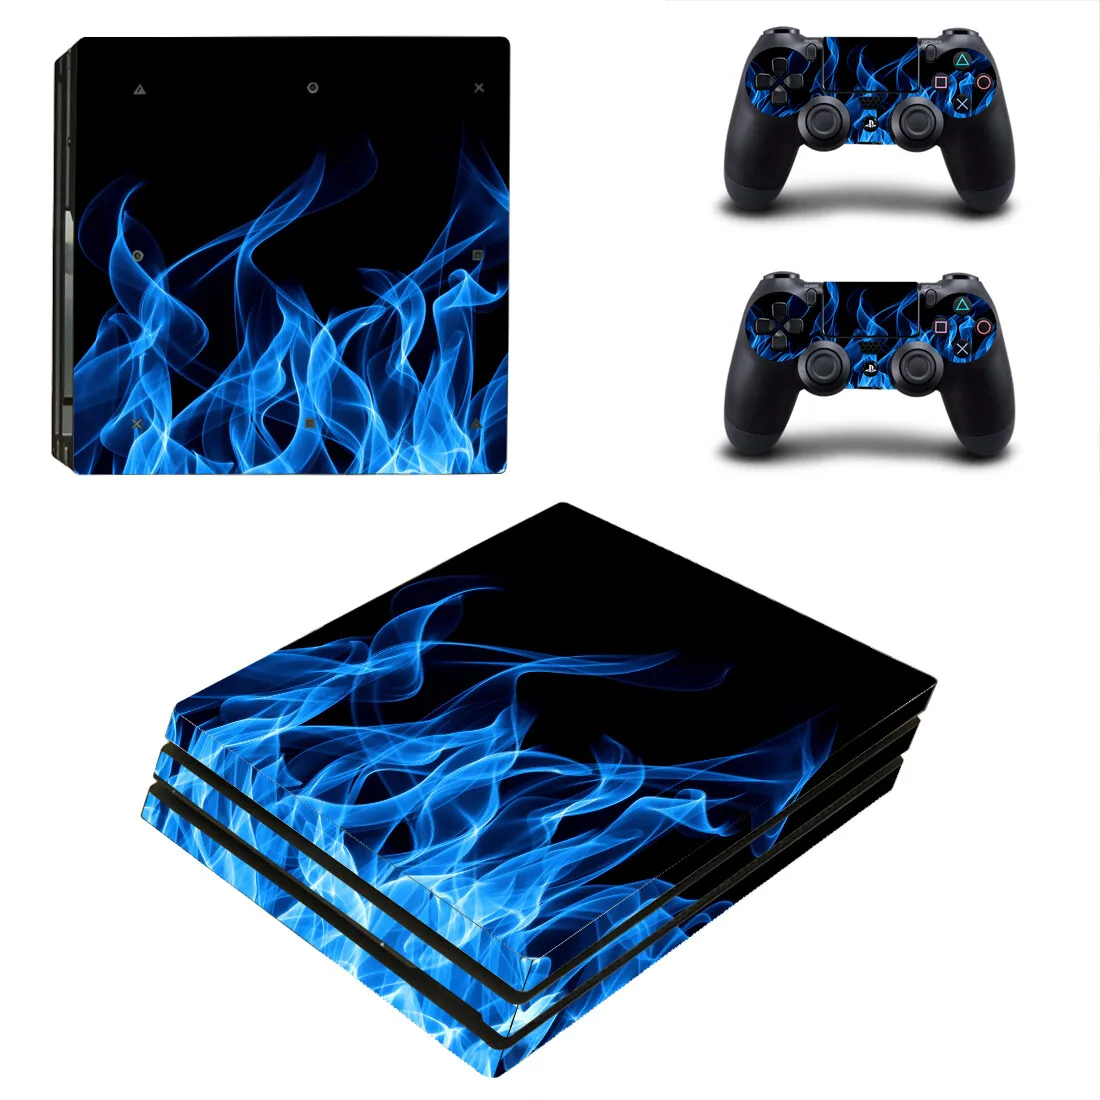 

Blue Fire PS4 Pro Skin Sticker Decals Cover For PlayStation 4 PS4 Pro Console & Controller Skins Vinyl